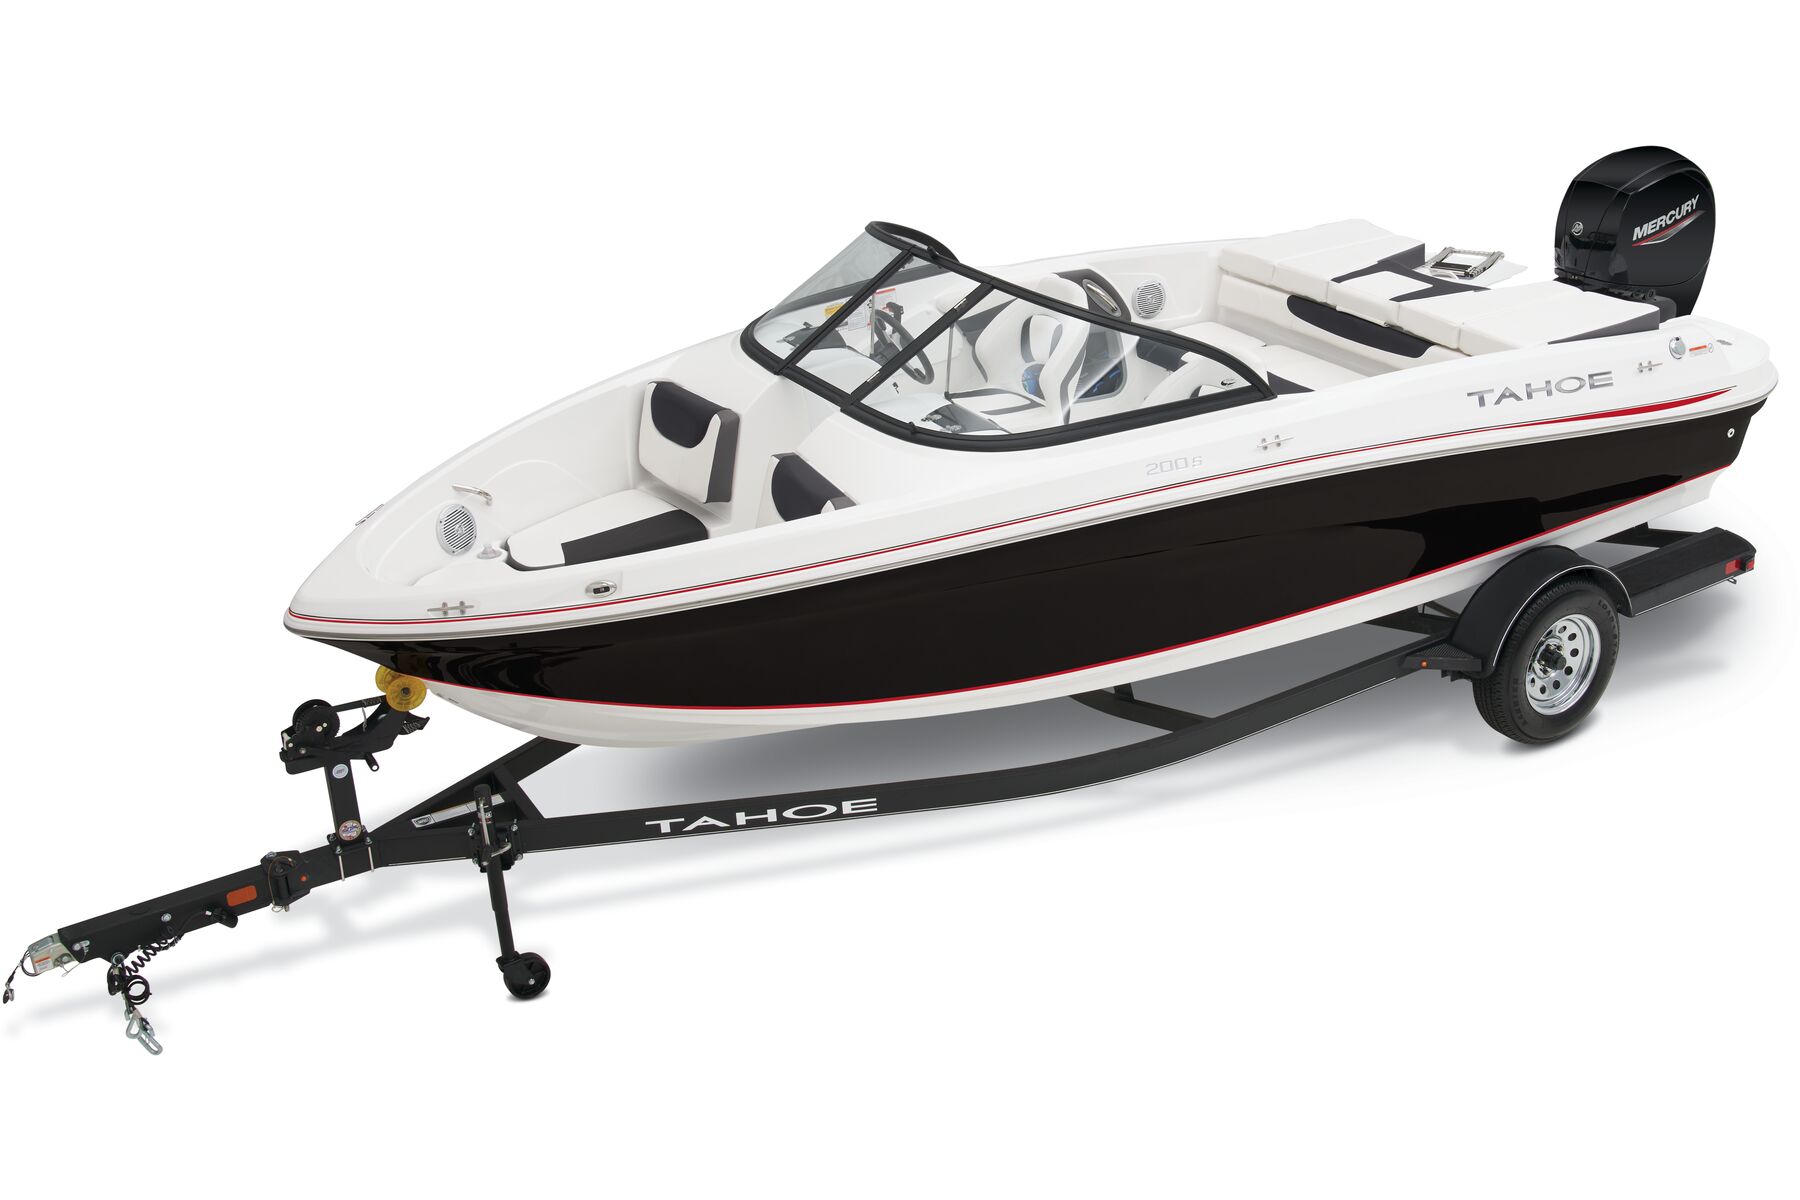 200 S - TAHOE Outboard Fish and Ski Boat